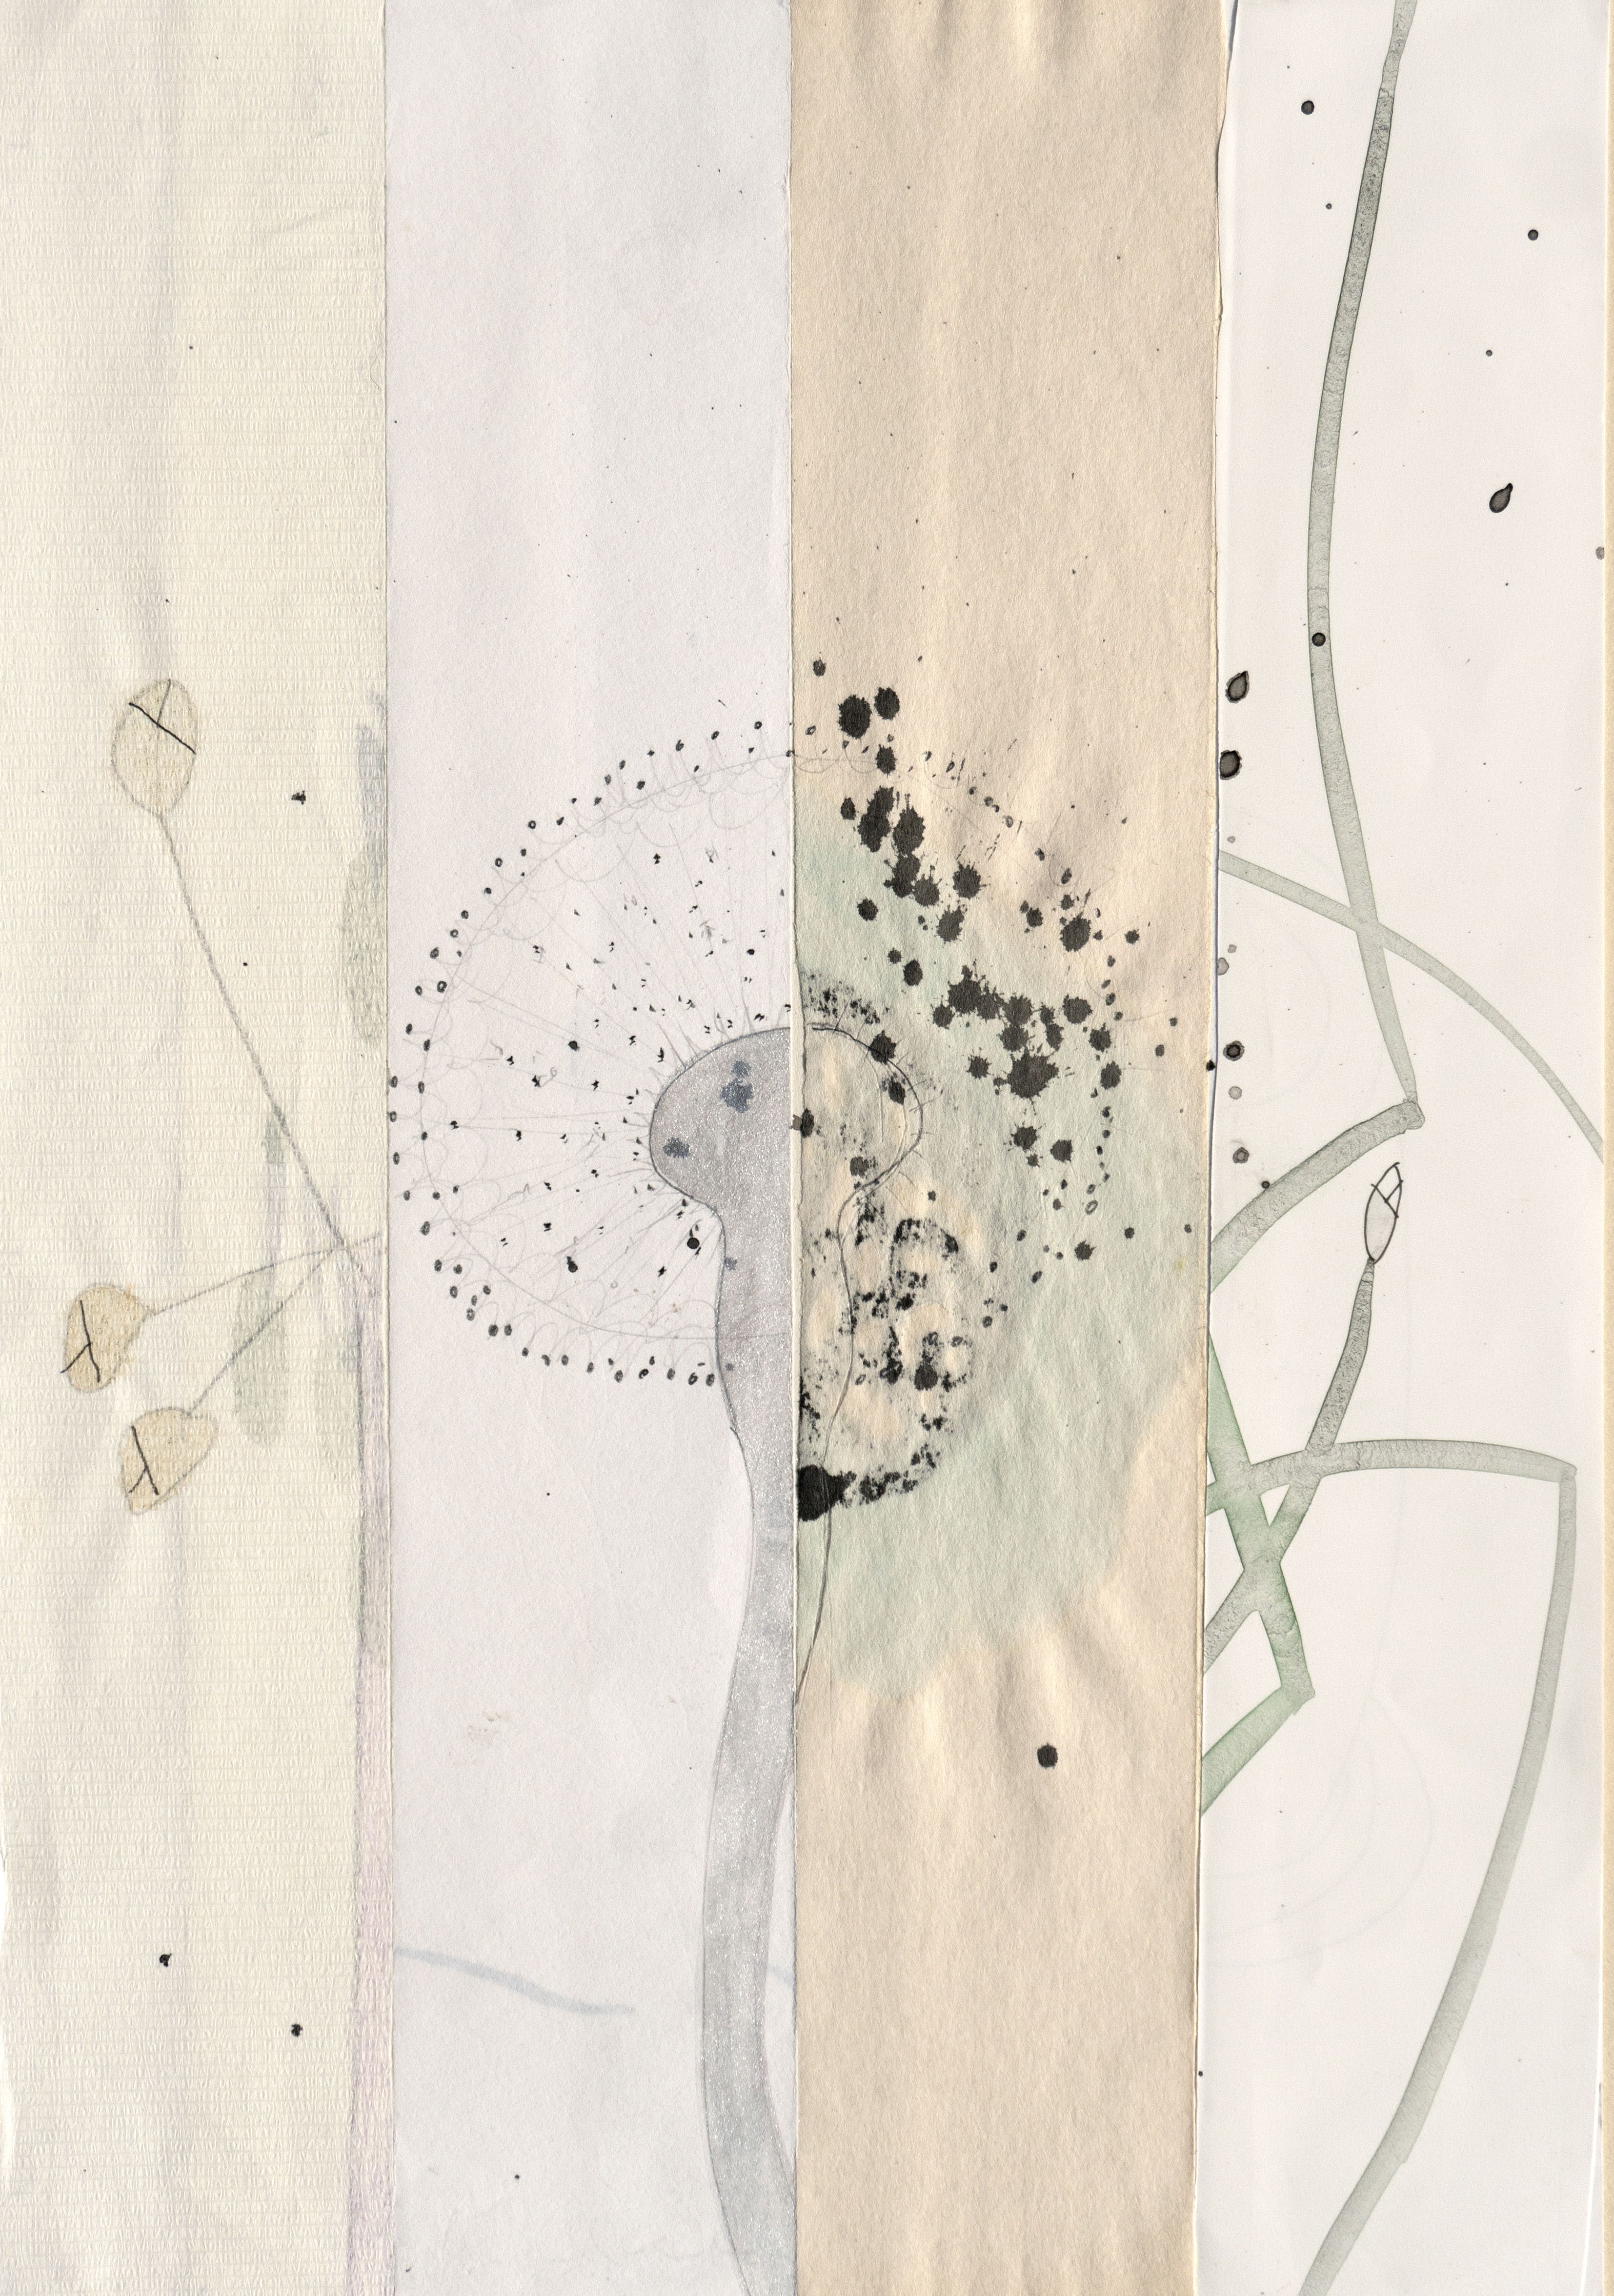 Mireille Gros, Seasons 8, pencil and watercolor on paper, online exhibition